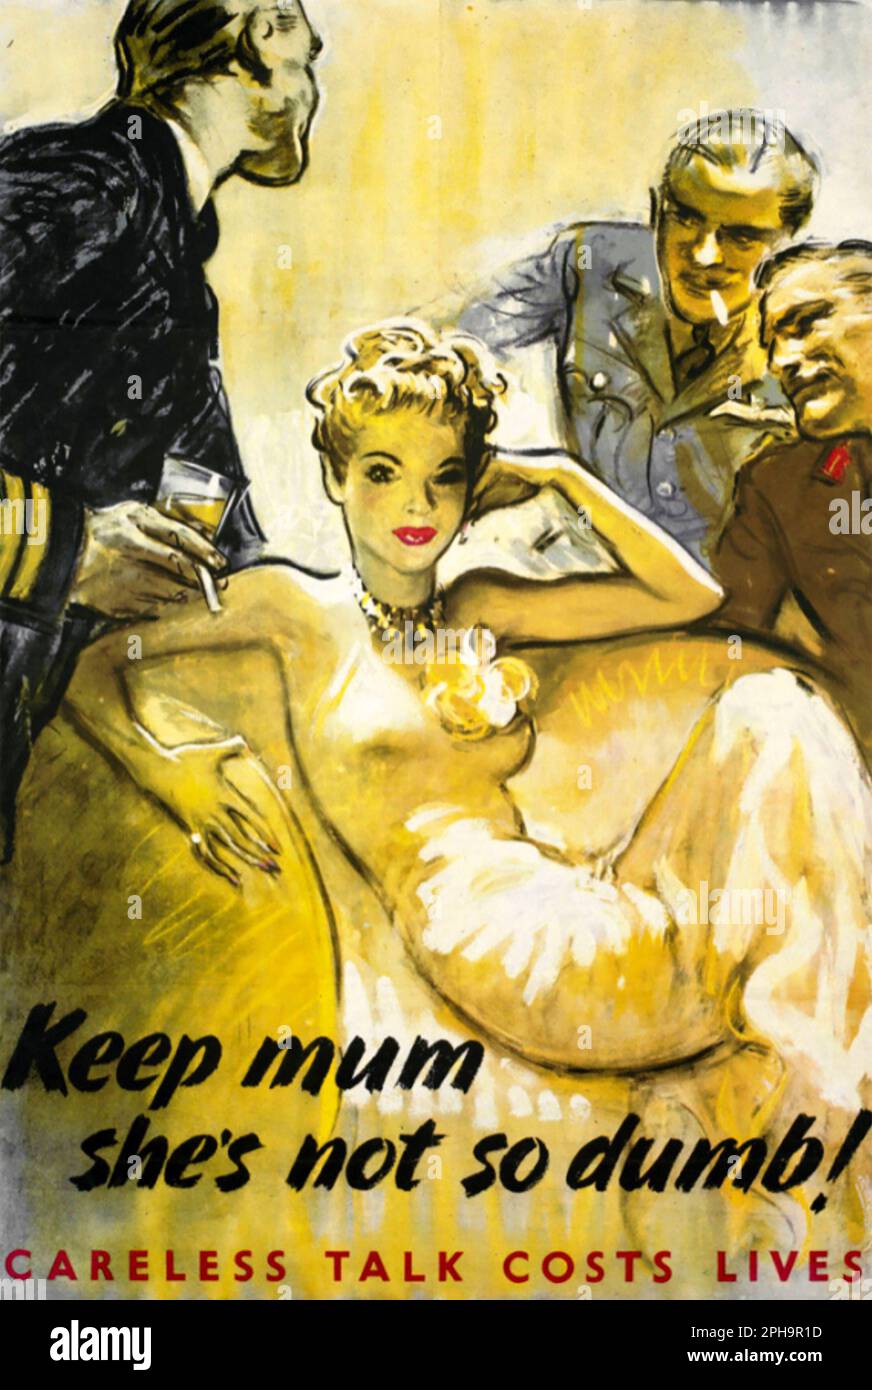 KEEP MUM SHE'S NOT SO DUMB British propaganda poster designed by Harold Forster in 1942 Stock Photo